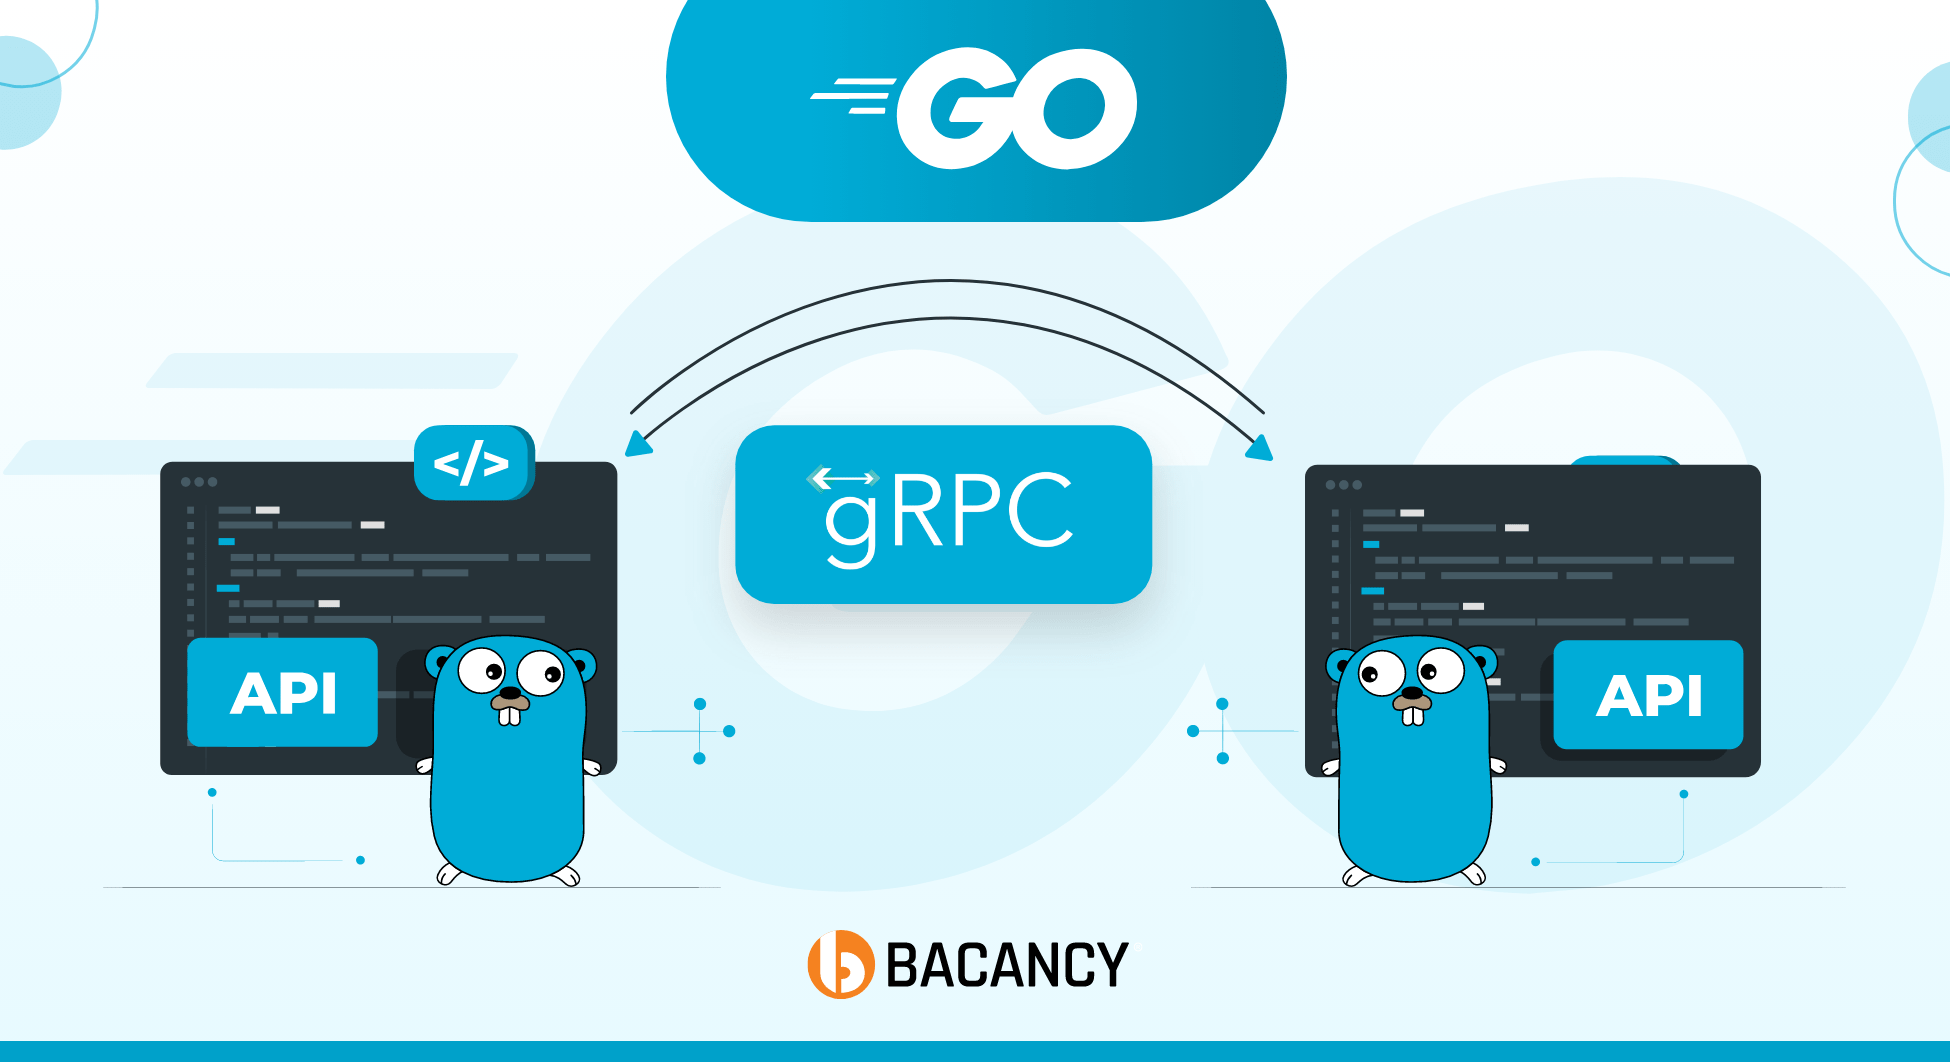 Creating a Golang gRPC Service: Step-by-Step Tutorial